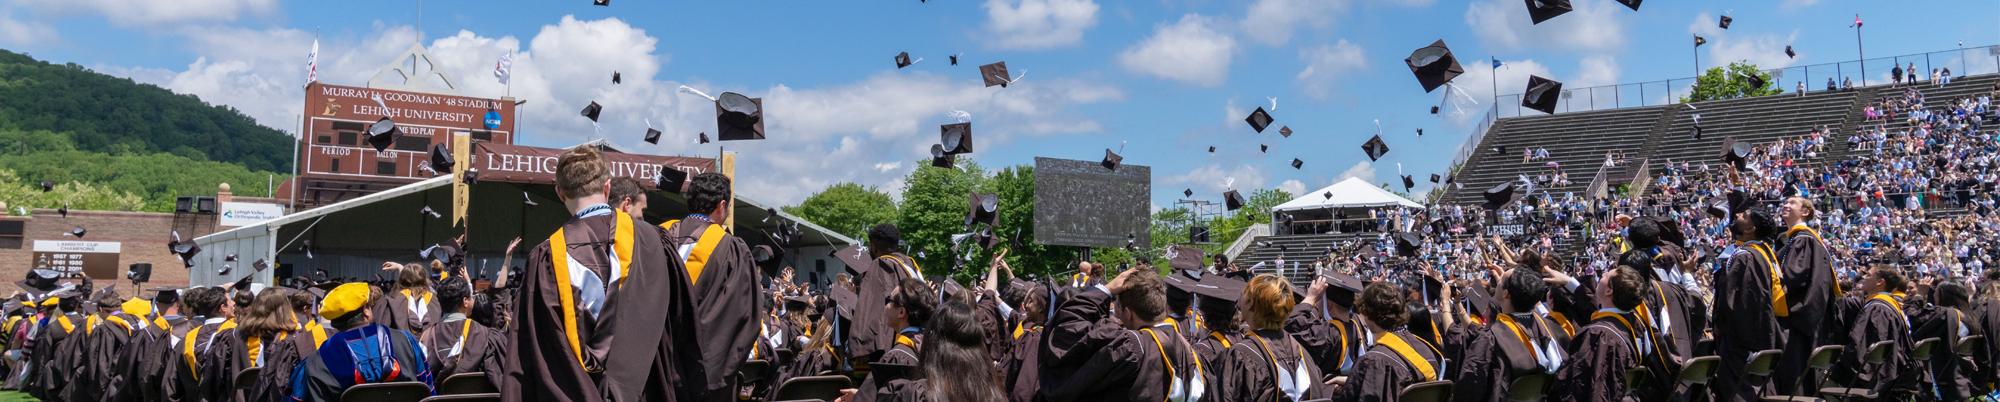 students toss mortarboards